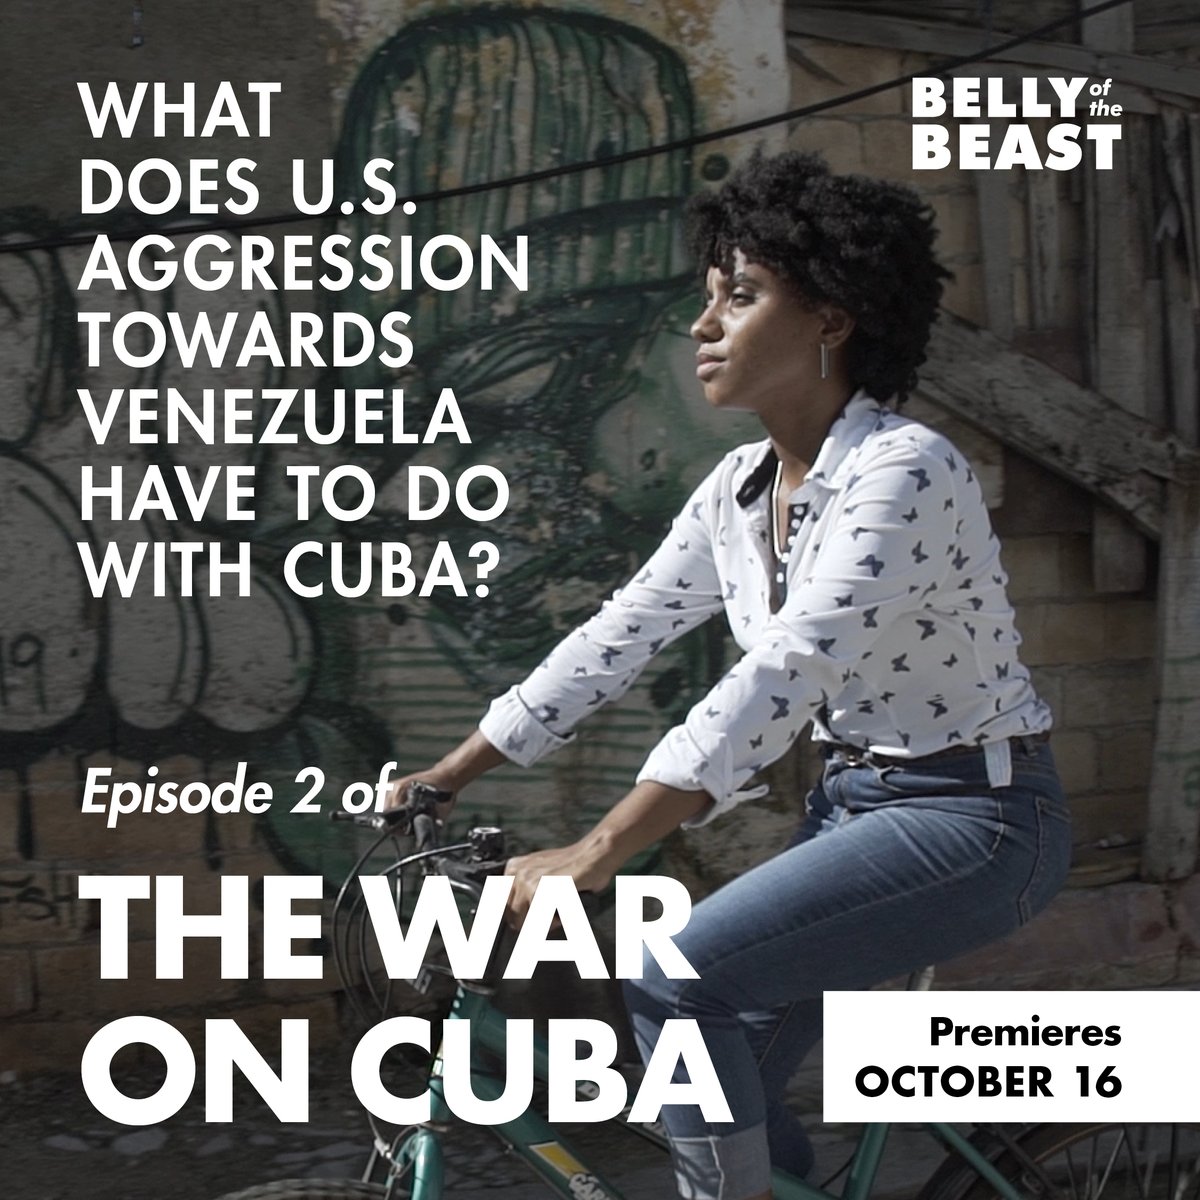 Episode 2 of 'The War on Cuba' is live tomorrow, Friday, Oct. 16 on @BellyoftheBeastCuba youtube channel. Spread the word. Share widely. Learn the answer to this question. Who is the doctor that tells all? Tune in to find out. #venezuelaunidacontraelbloqueo #unblockCuba